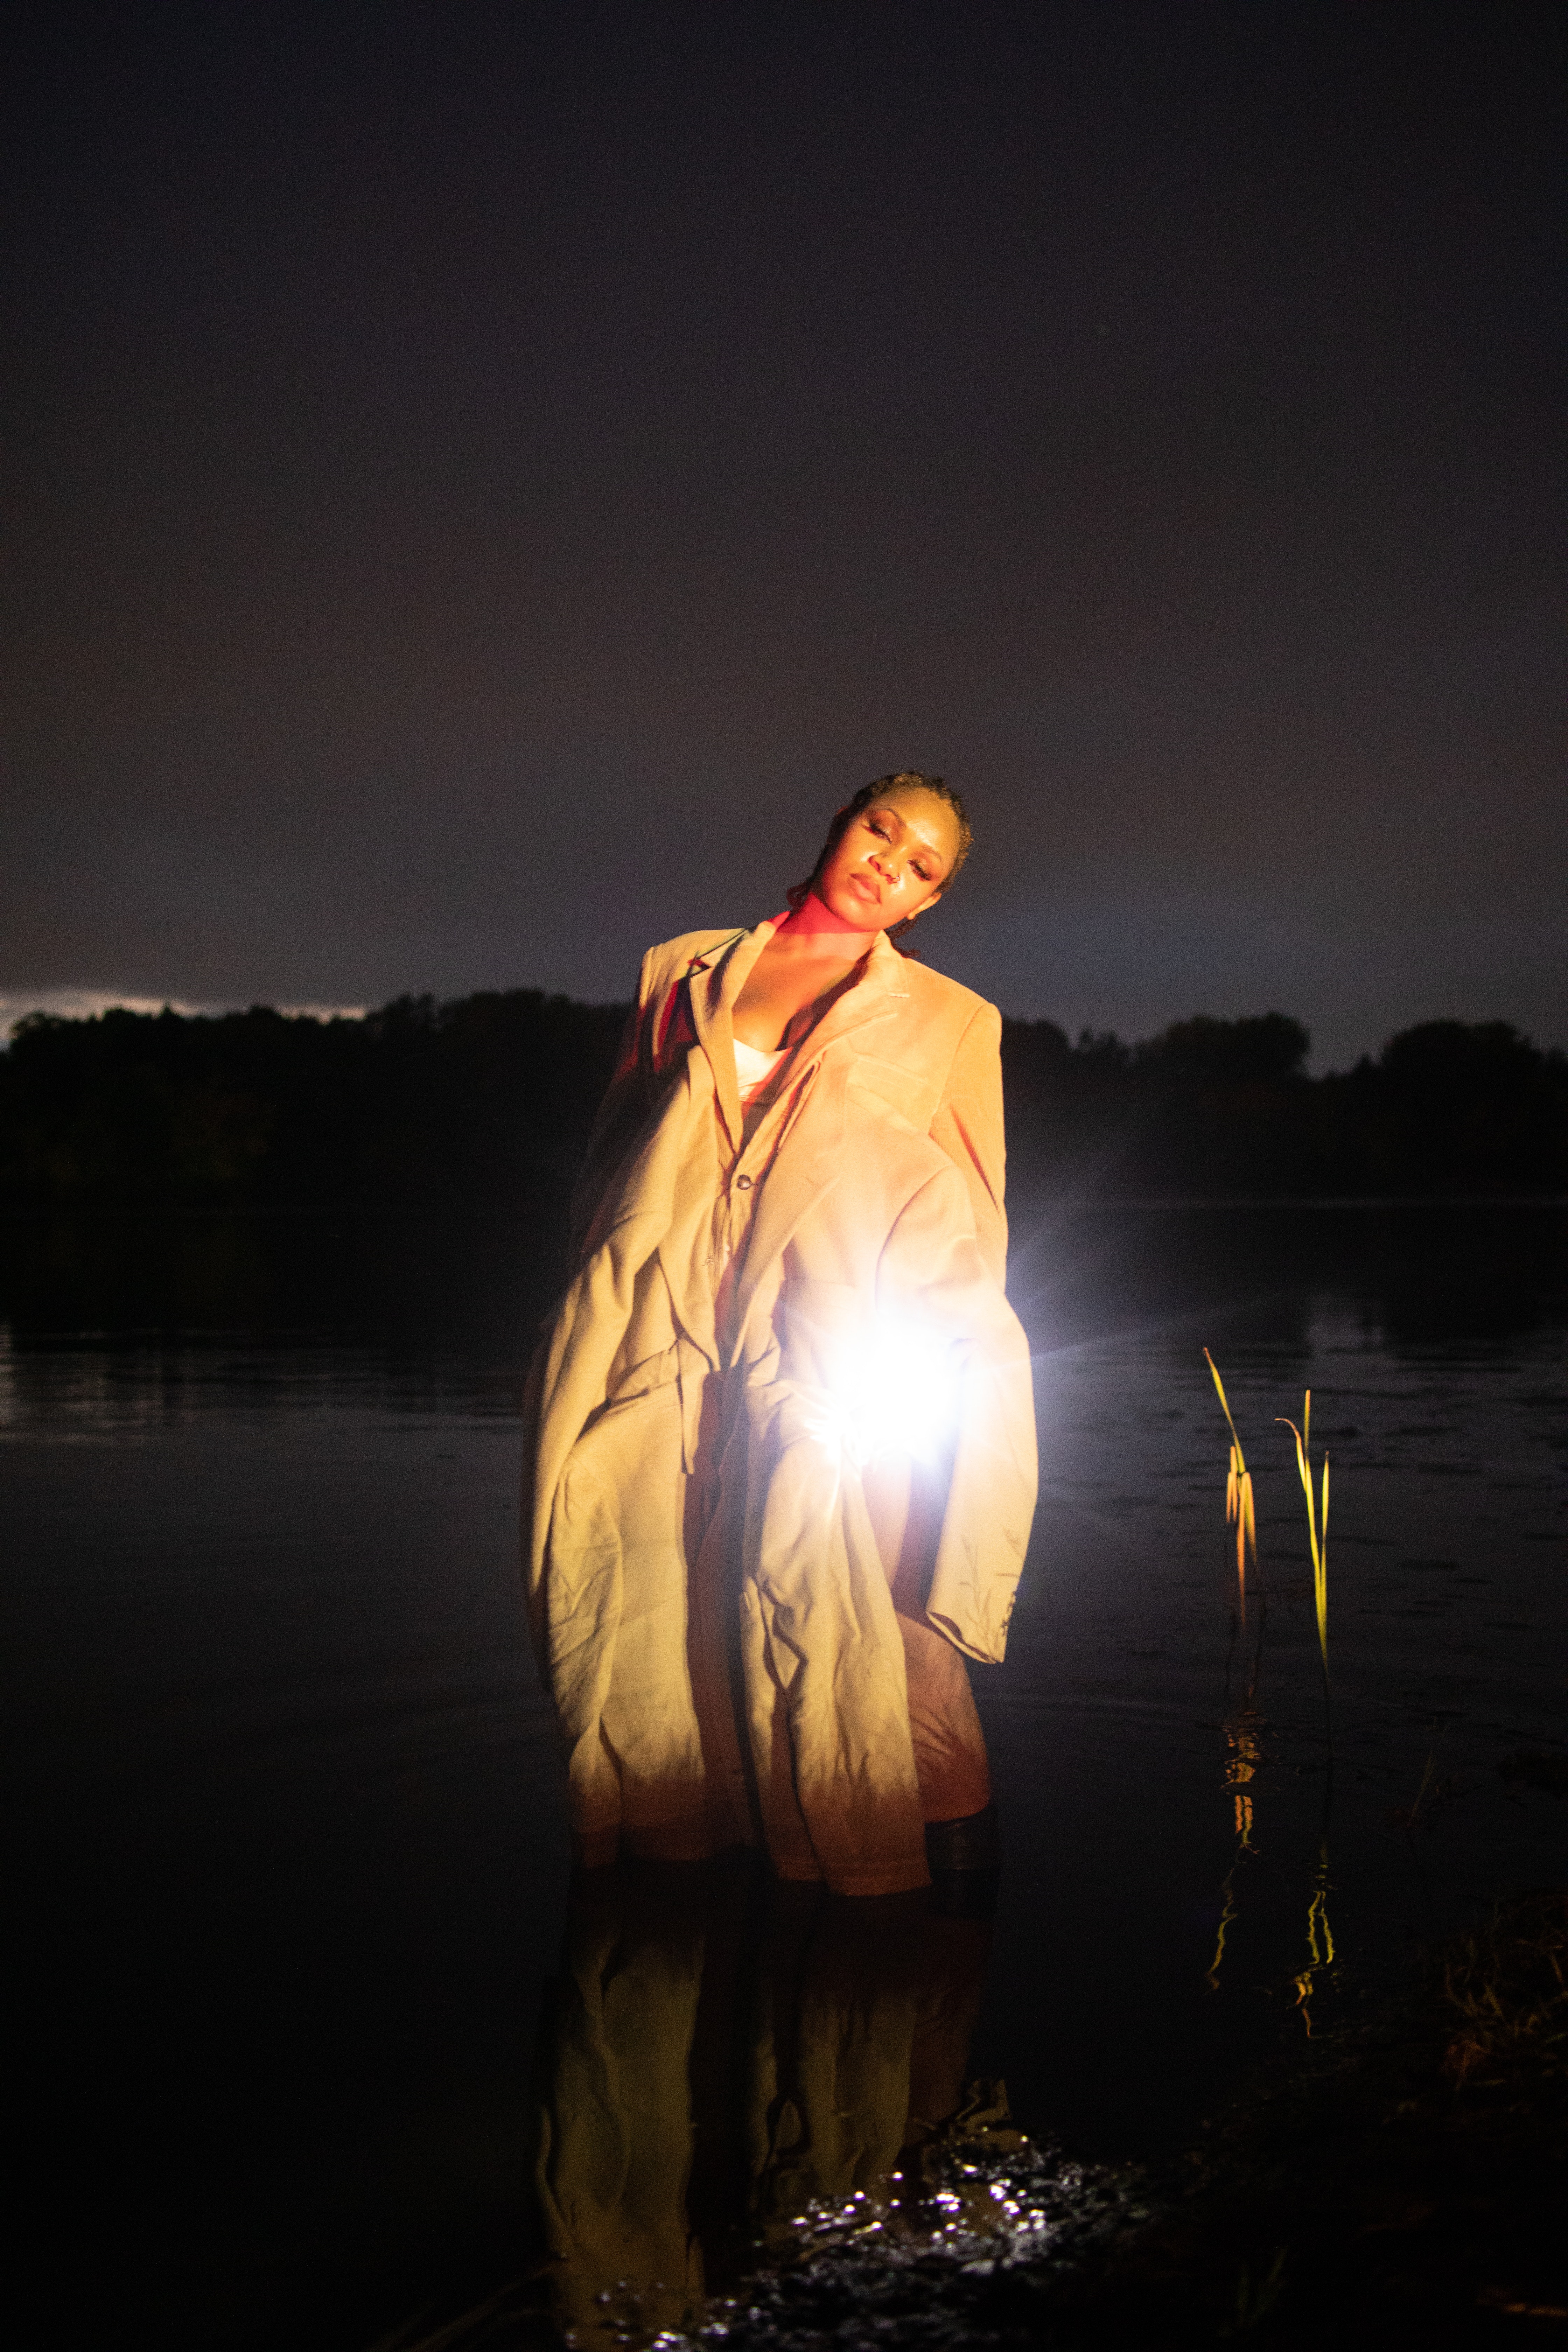 A person stands in a lake at night holding something glowing.